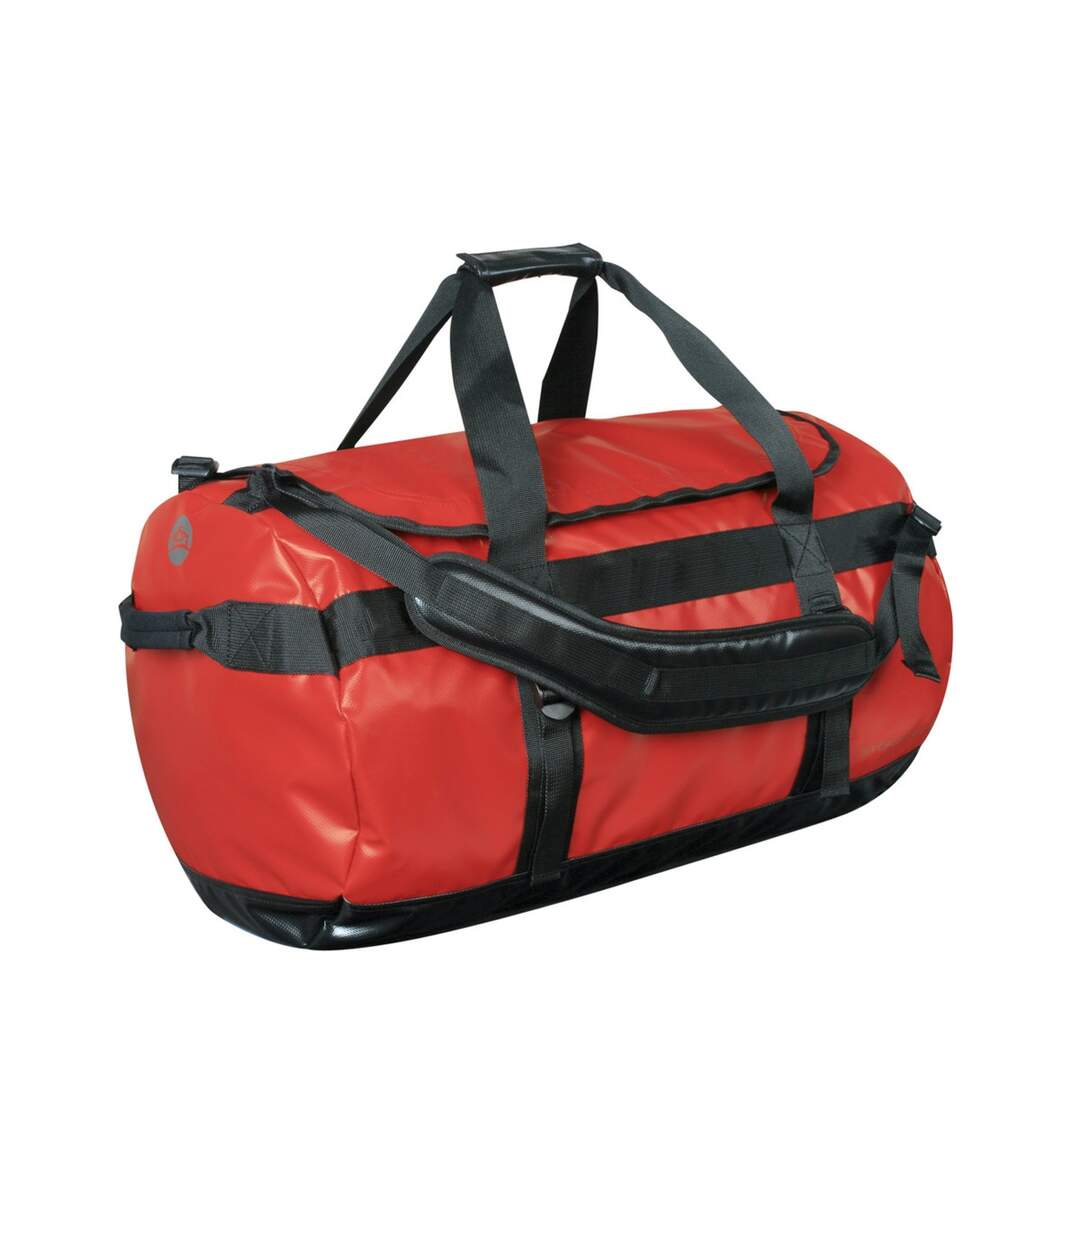 Stormtech Waterproof Gear Holdall Bag (Large) (Pack of 2) (Red/Black) (One Size)